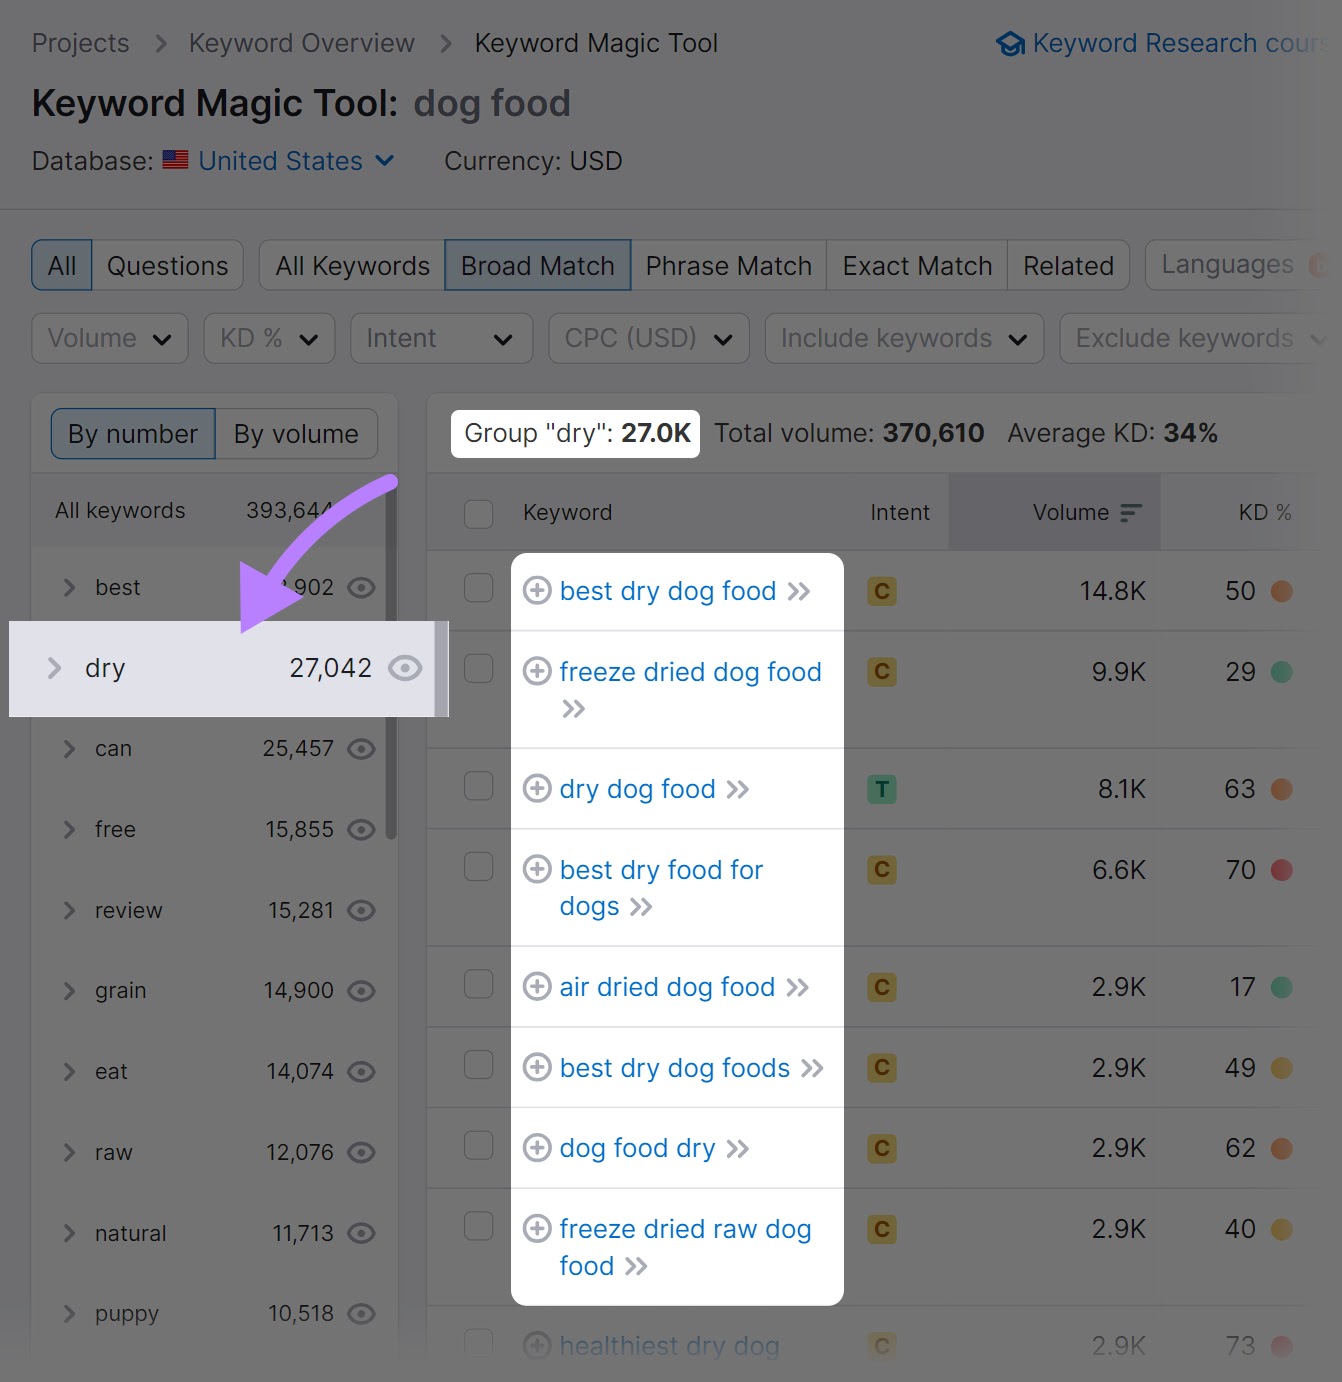 Keyword Magic Tool results for "dog food" with "dry" category selected